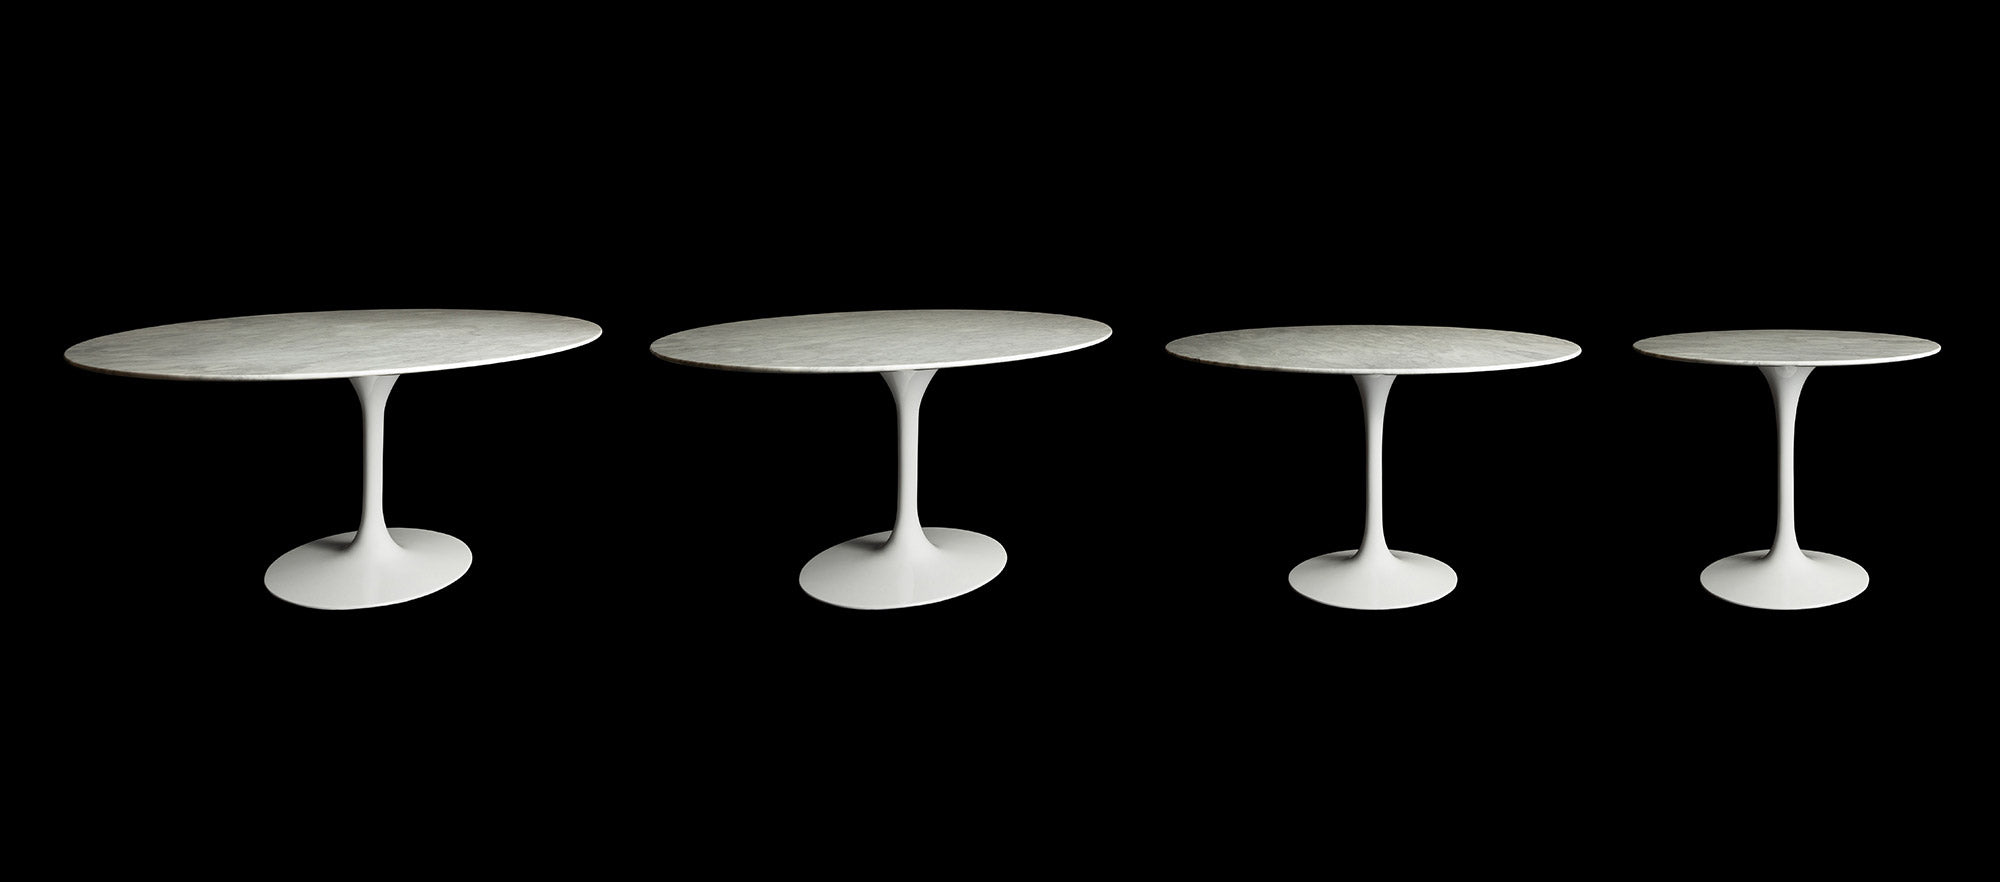 A row of Solid White Carrara Marble Tulip Tables in circular and oval shapes stand in line and stand out beautifully against the black behind them